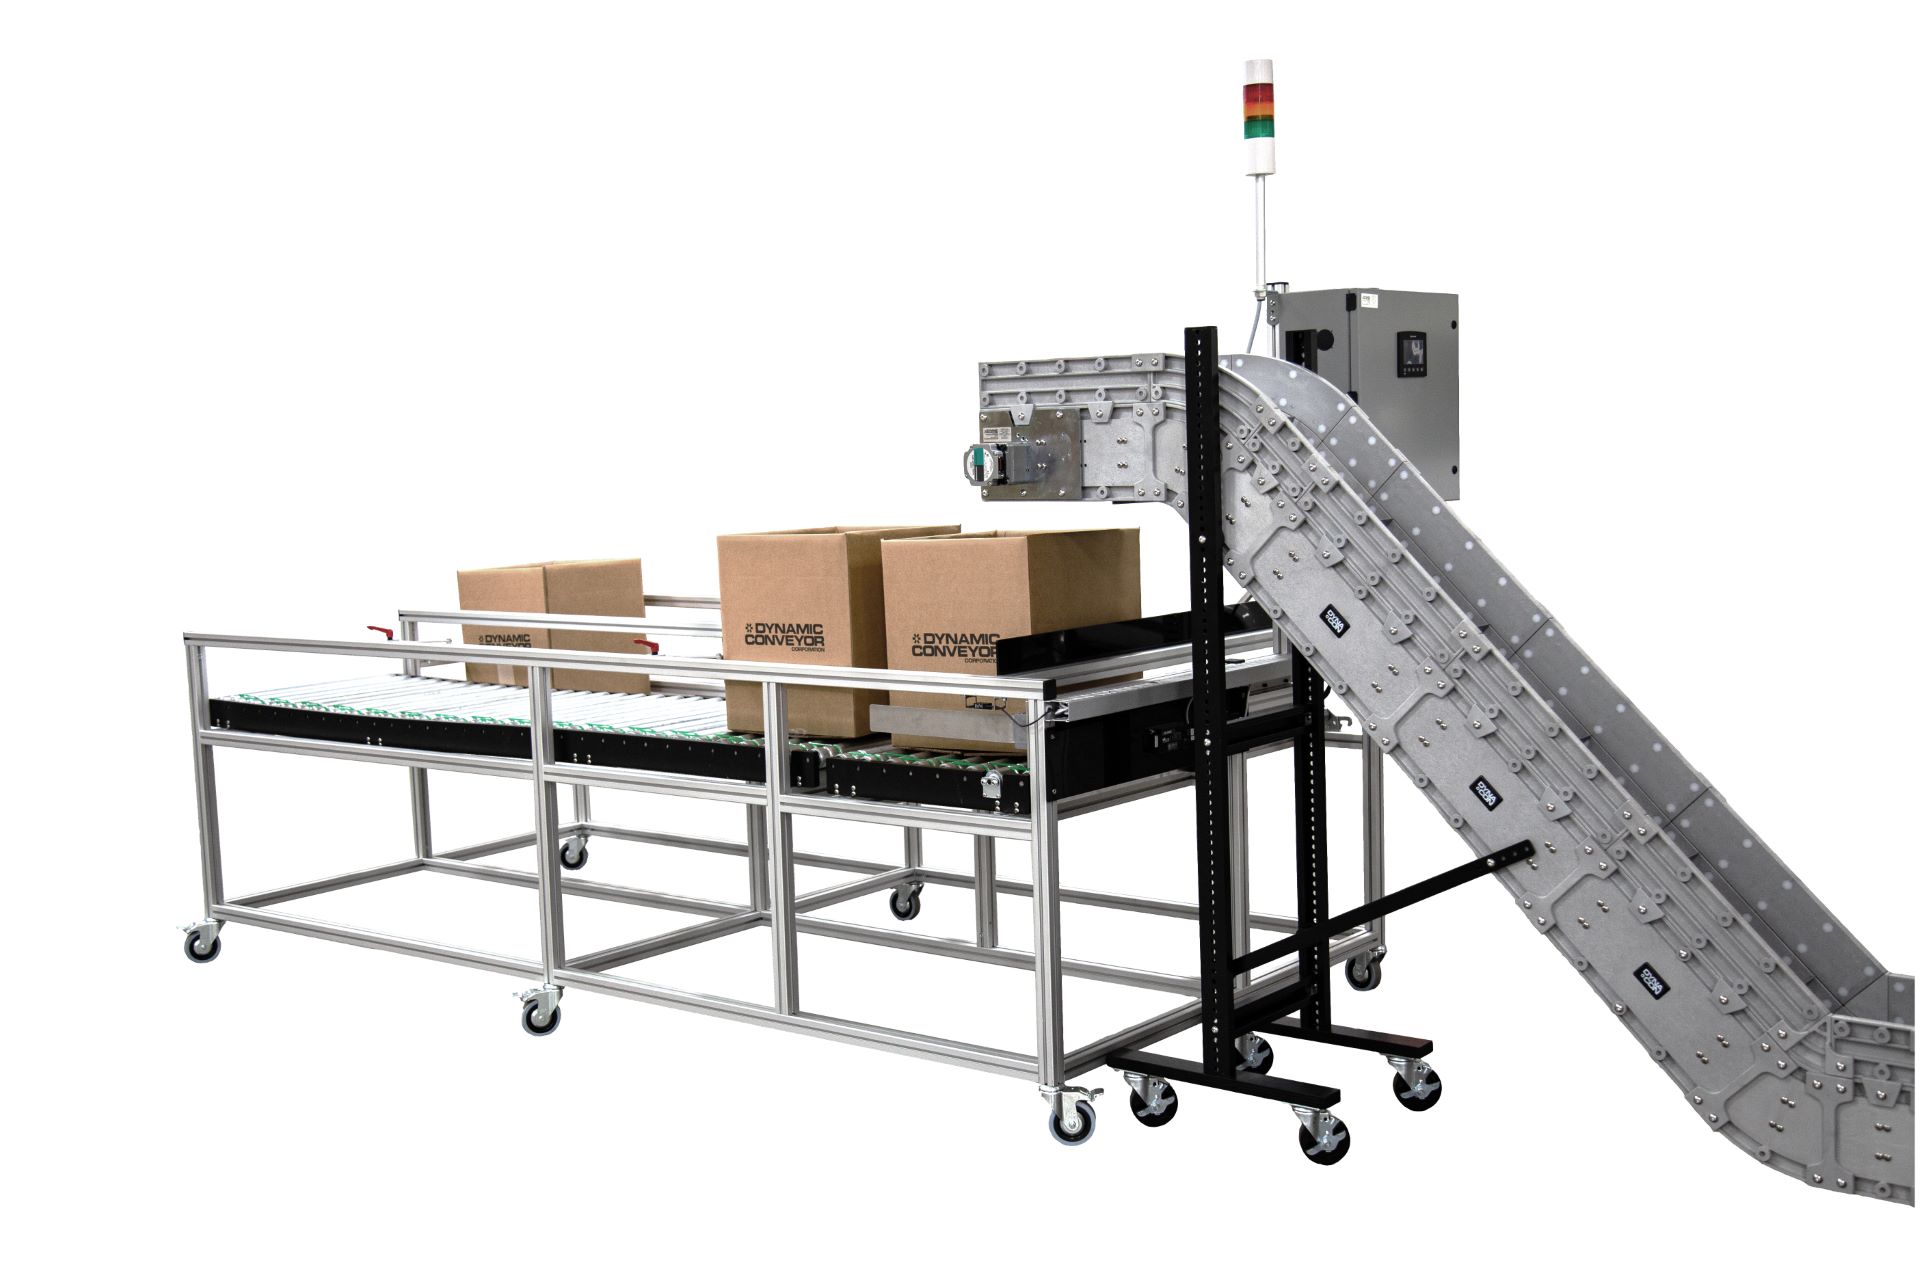 New Standard Box Filling Conveyor Systems